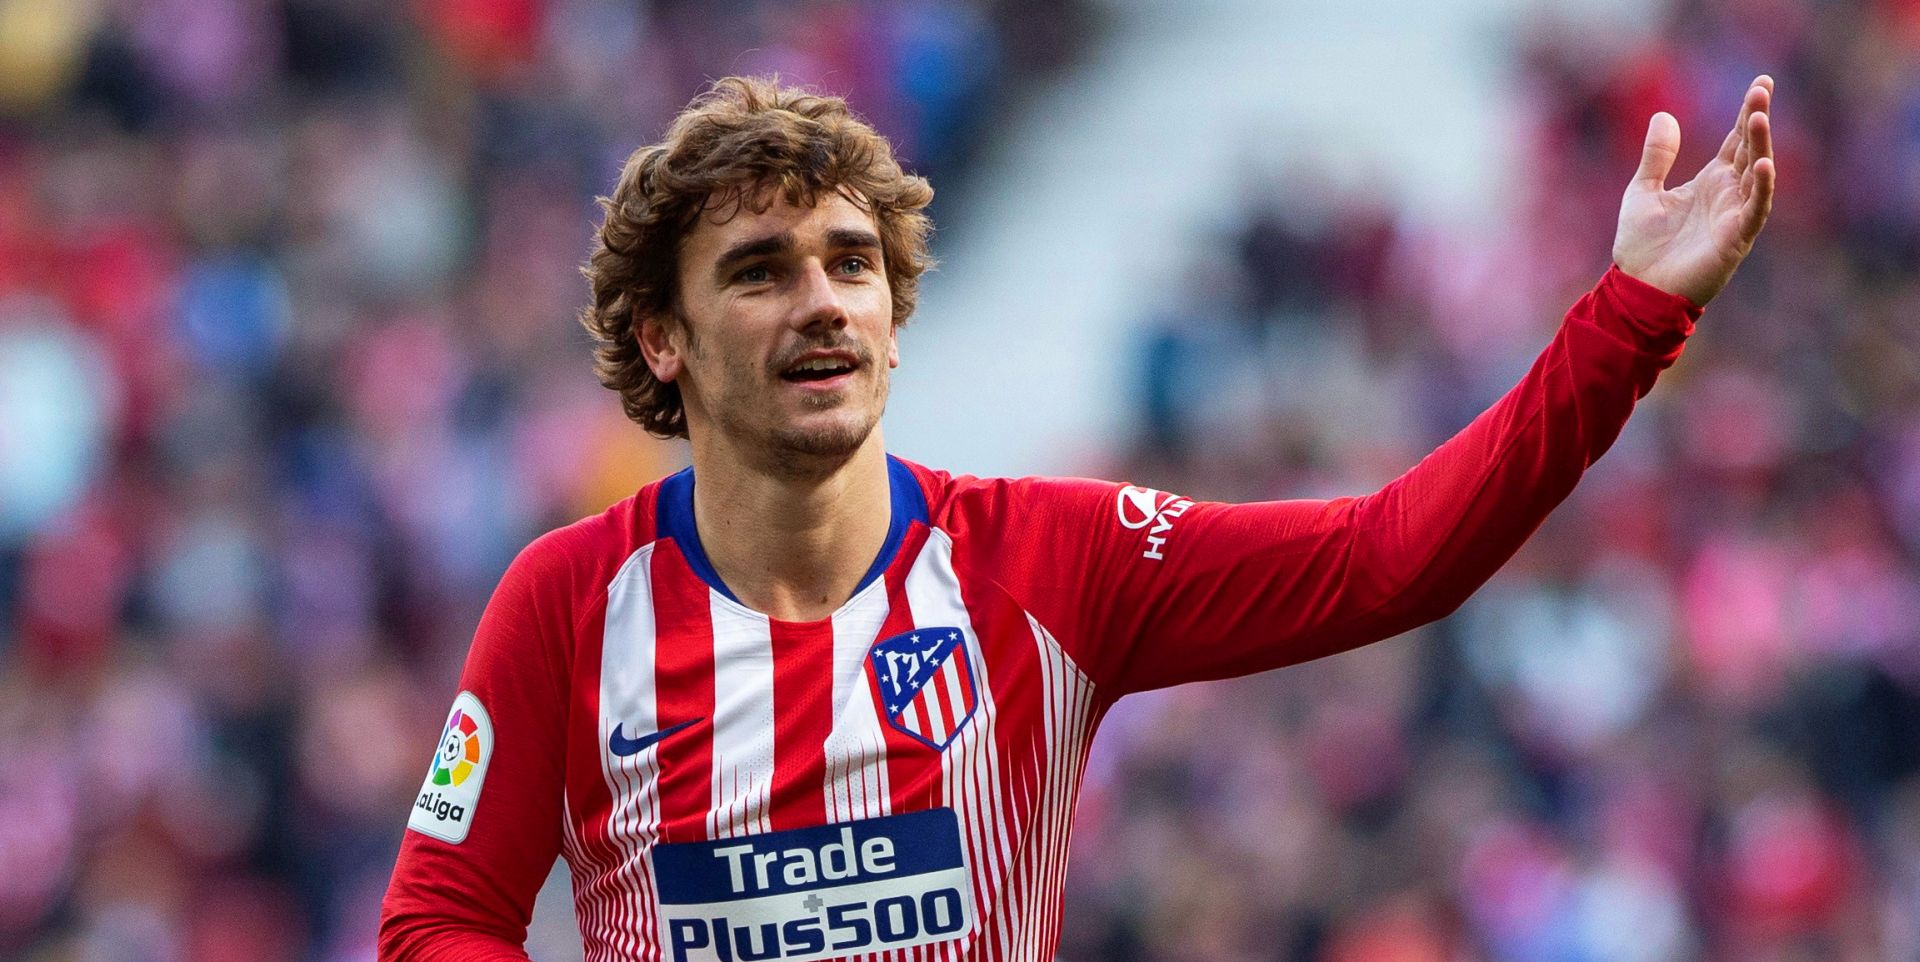 epa07712412 (FILE) - Atletico Madrid's forward Antoine Griezmann celebrates after scoring the 1-0 lead during the Spanish La Liga soccer match between Atletico Madrid and Getafe CF in Madrid, Spain, 26 January 2019 (reissued 12 July 2019). FC Barcelona announced on 12 July 2019 to have paid the 120 milion Euro buyout clause to release Antoine Griezmann from Atletico Madrid. Barcelona also announced that Griezmann will sign a five season contract, untill 30 June 2024, with a buyout close of 800 milion Euro.  EPA/RODRIGO JIMENEZ *** Local Caption *** 54936002